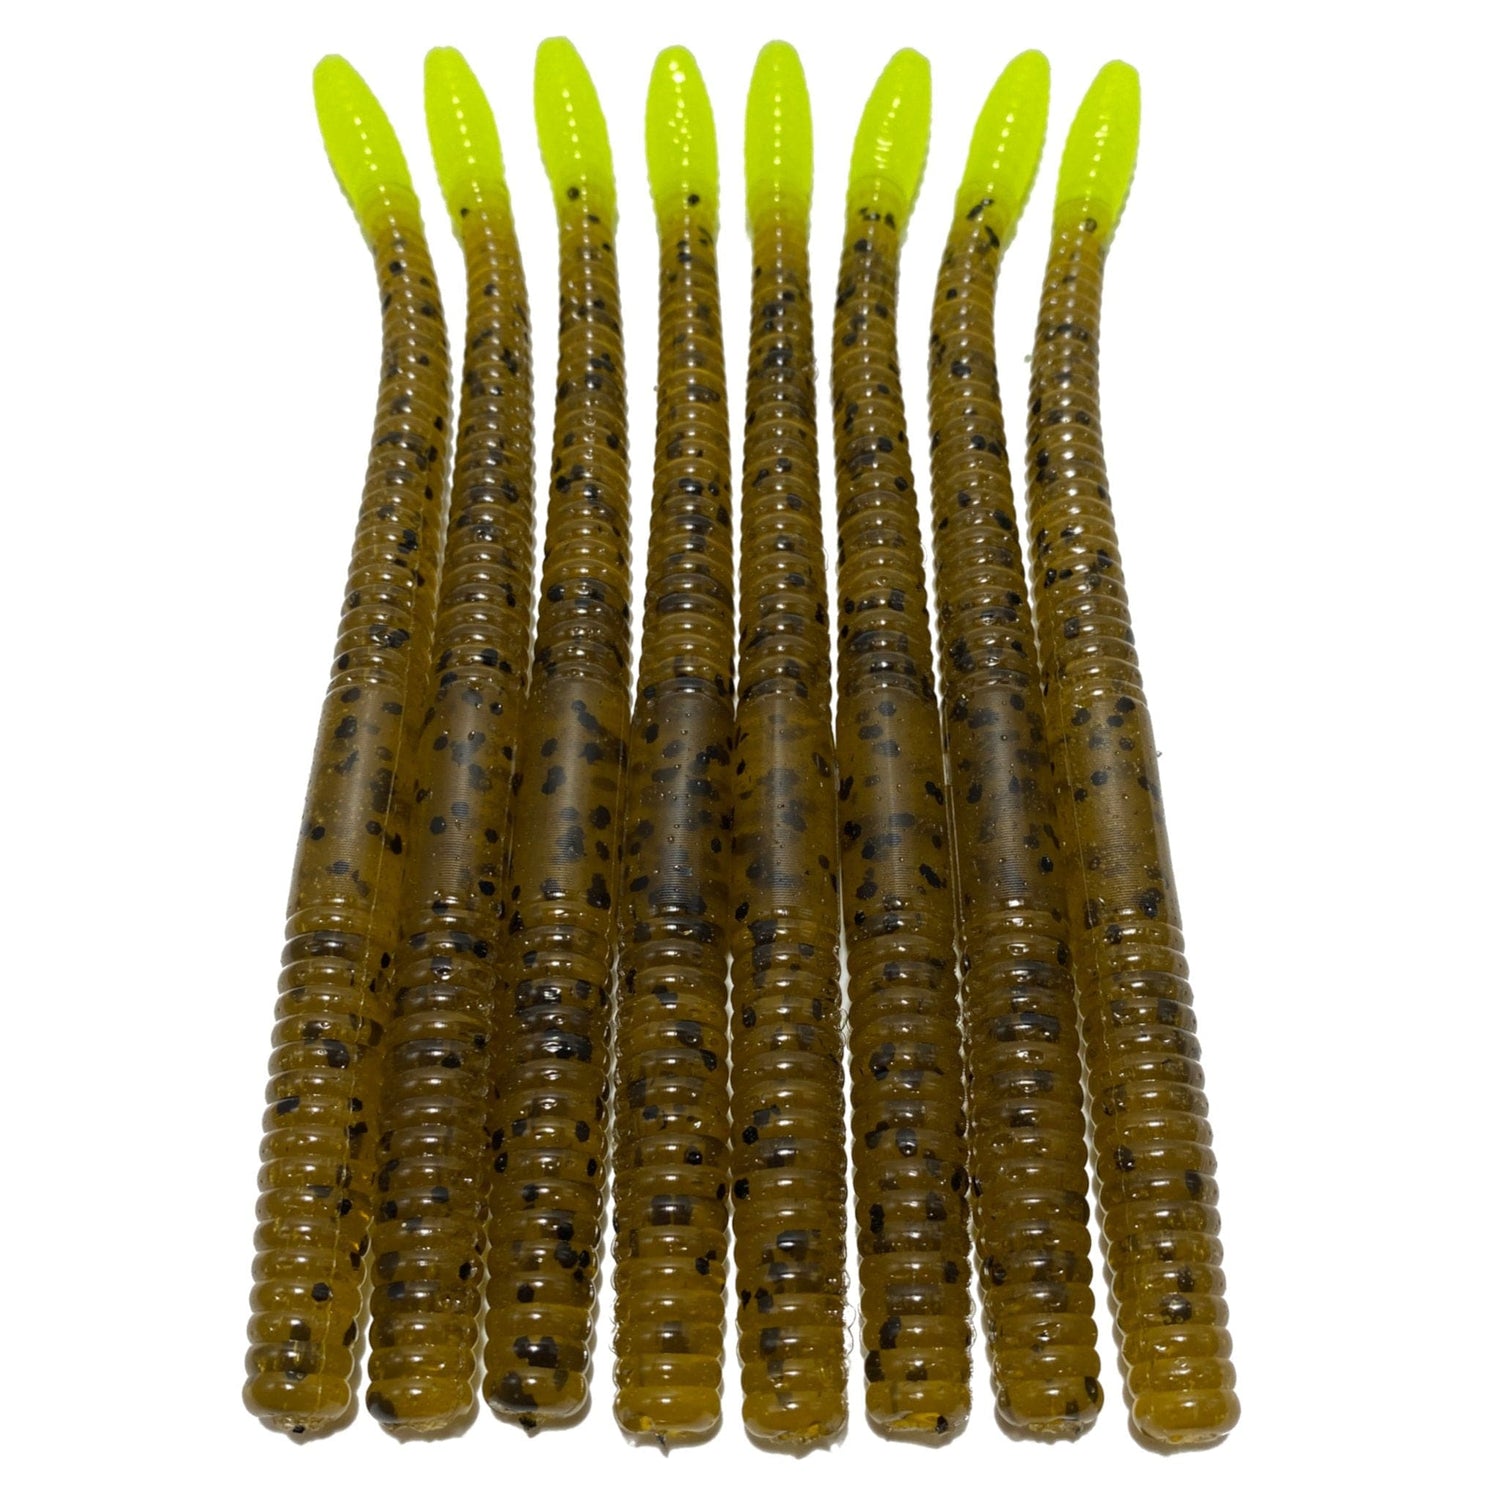 Obee Finesse Worm - Green Pumpkin Chartreuse - Obee Fishing Co.